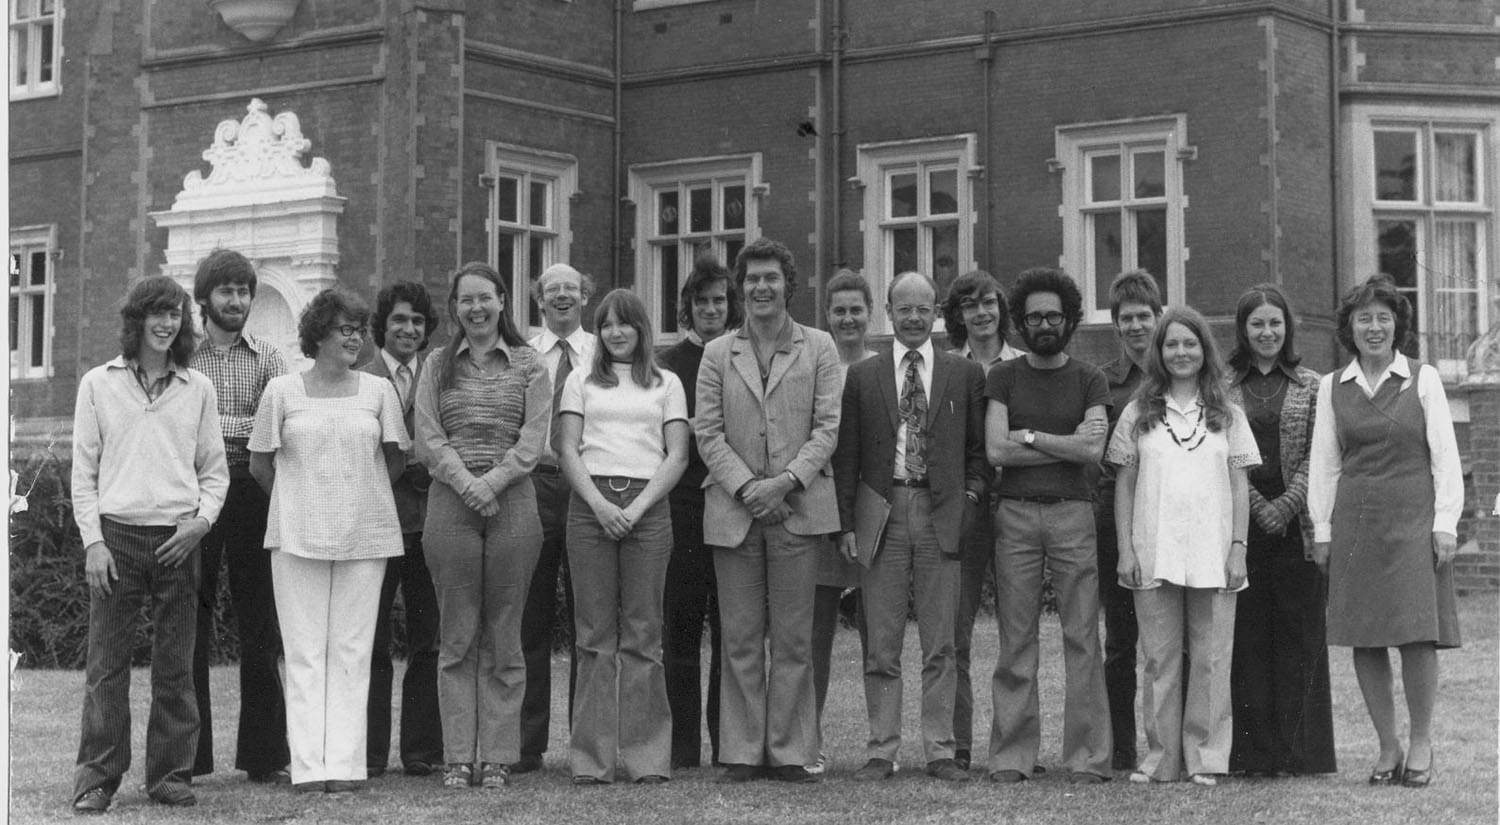 Biology staff in front Wivenhoe House during late 1960s 